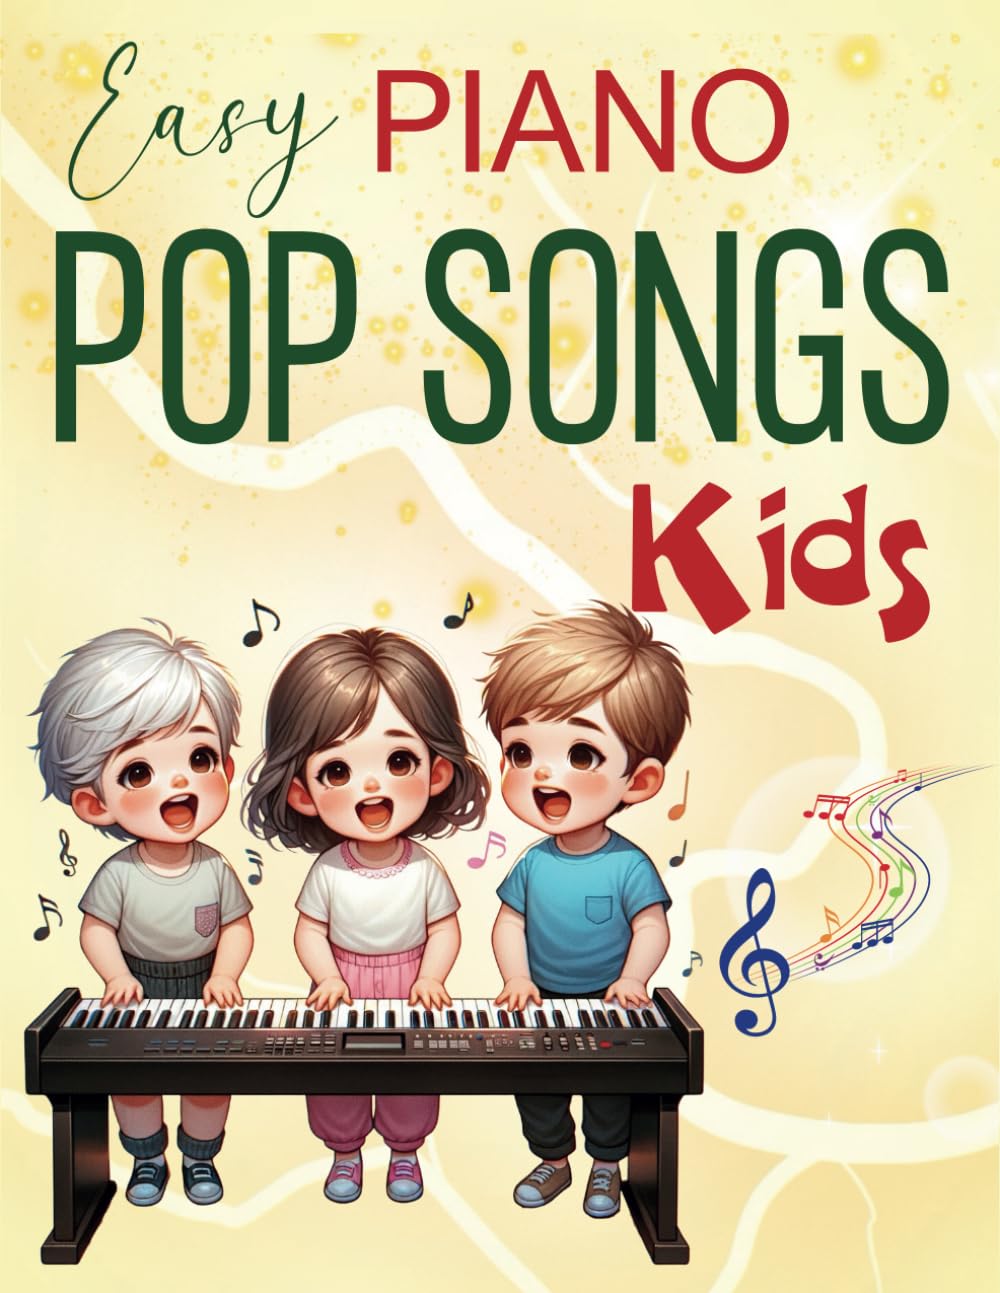 Easy Piano Pop Songs For Kids: 61 songs for Super Easy Piano